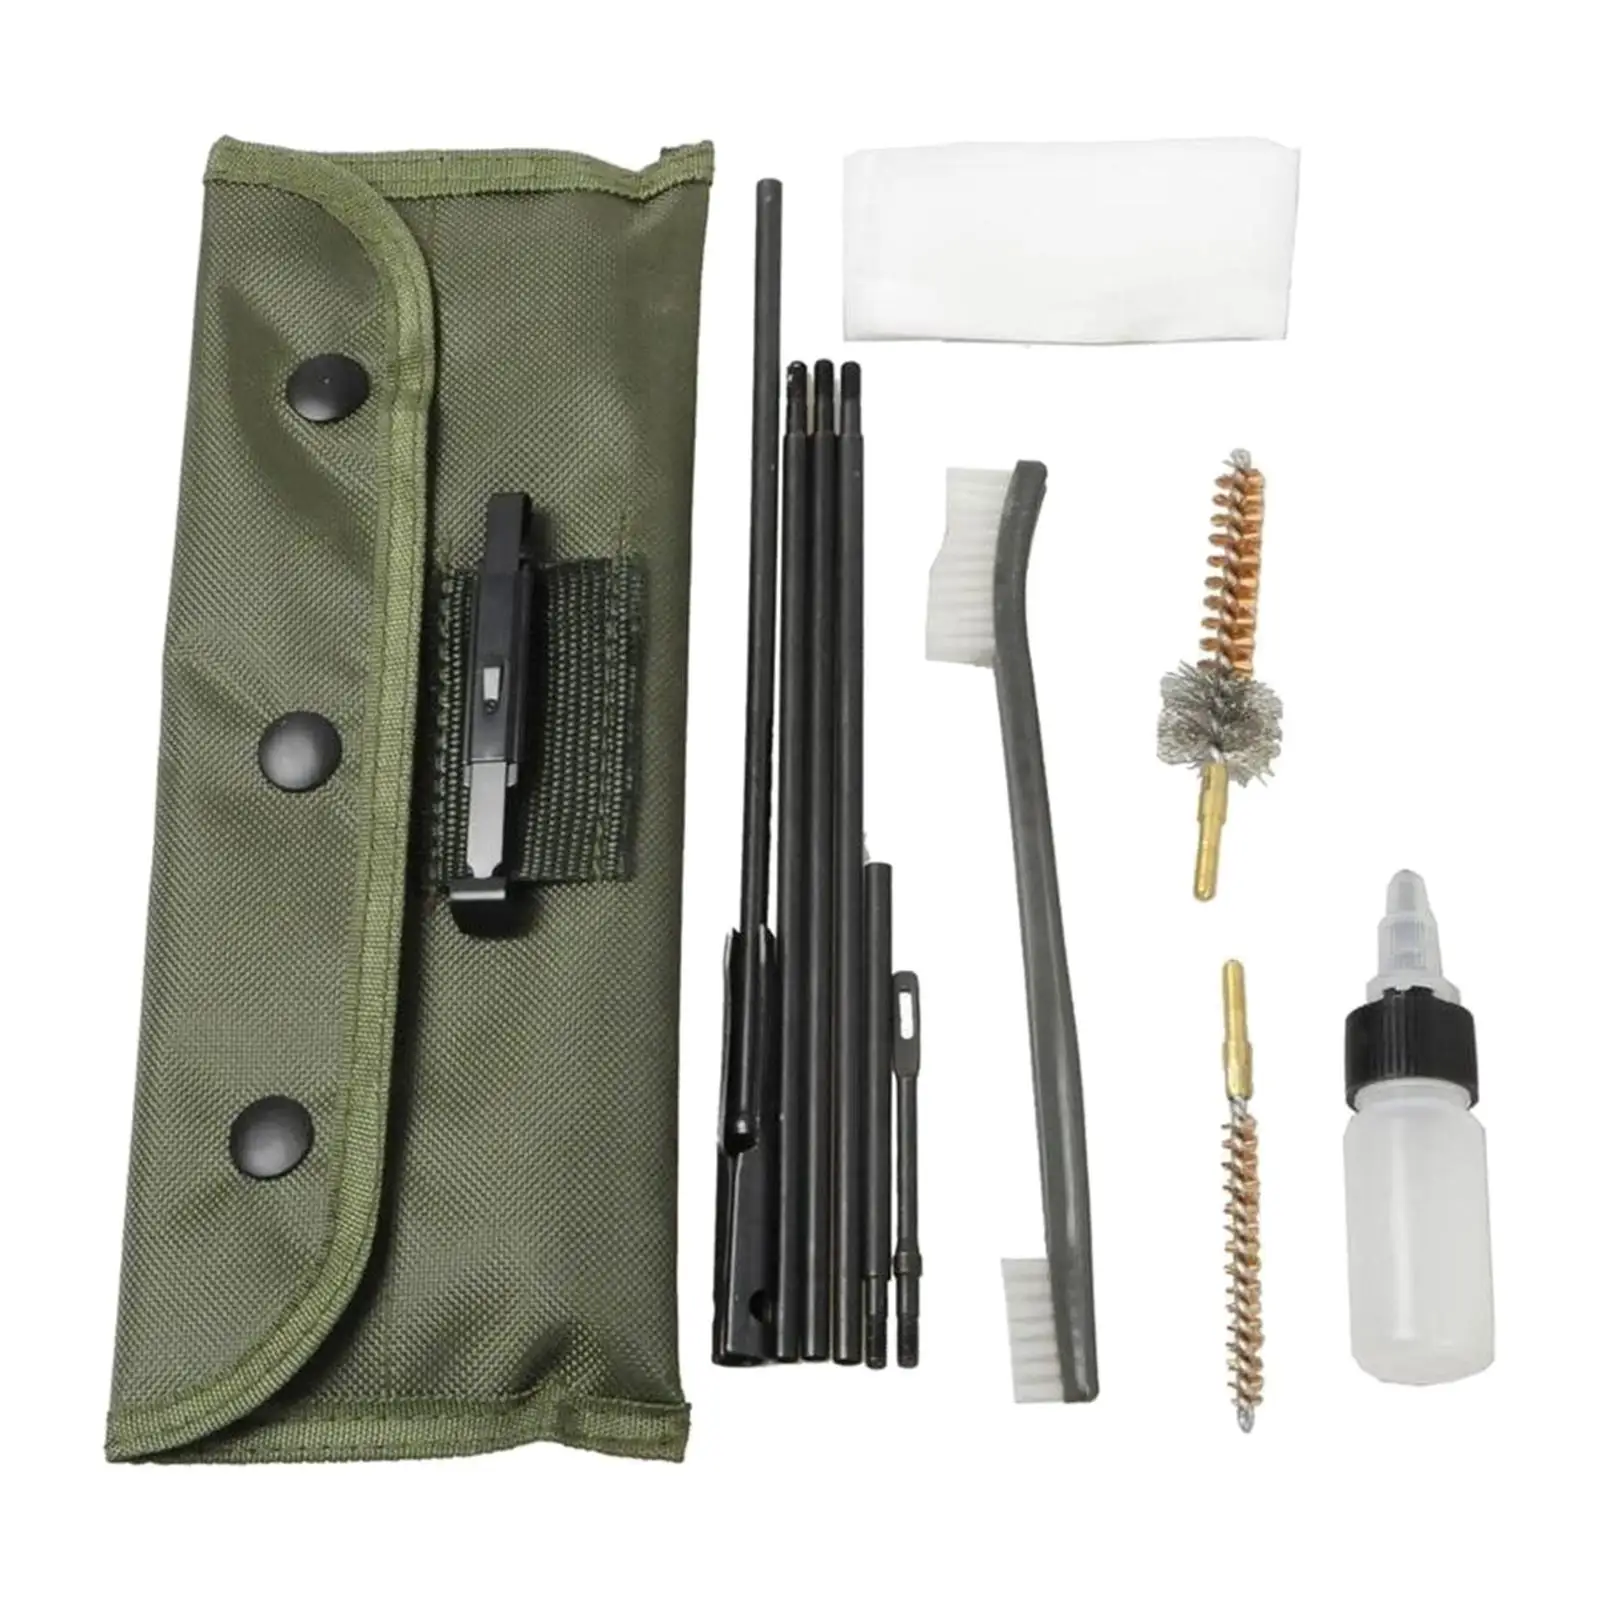 Multifunctional Pipe Cleaning Brush Kit with Canvas Pouch Dual Ended Nylon Brush and Oil Bottle Professional Durable Versatile